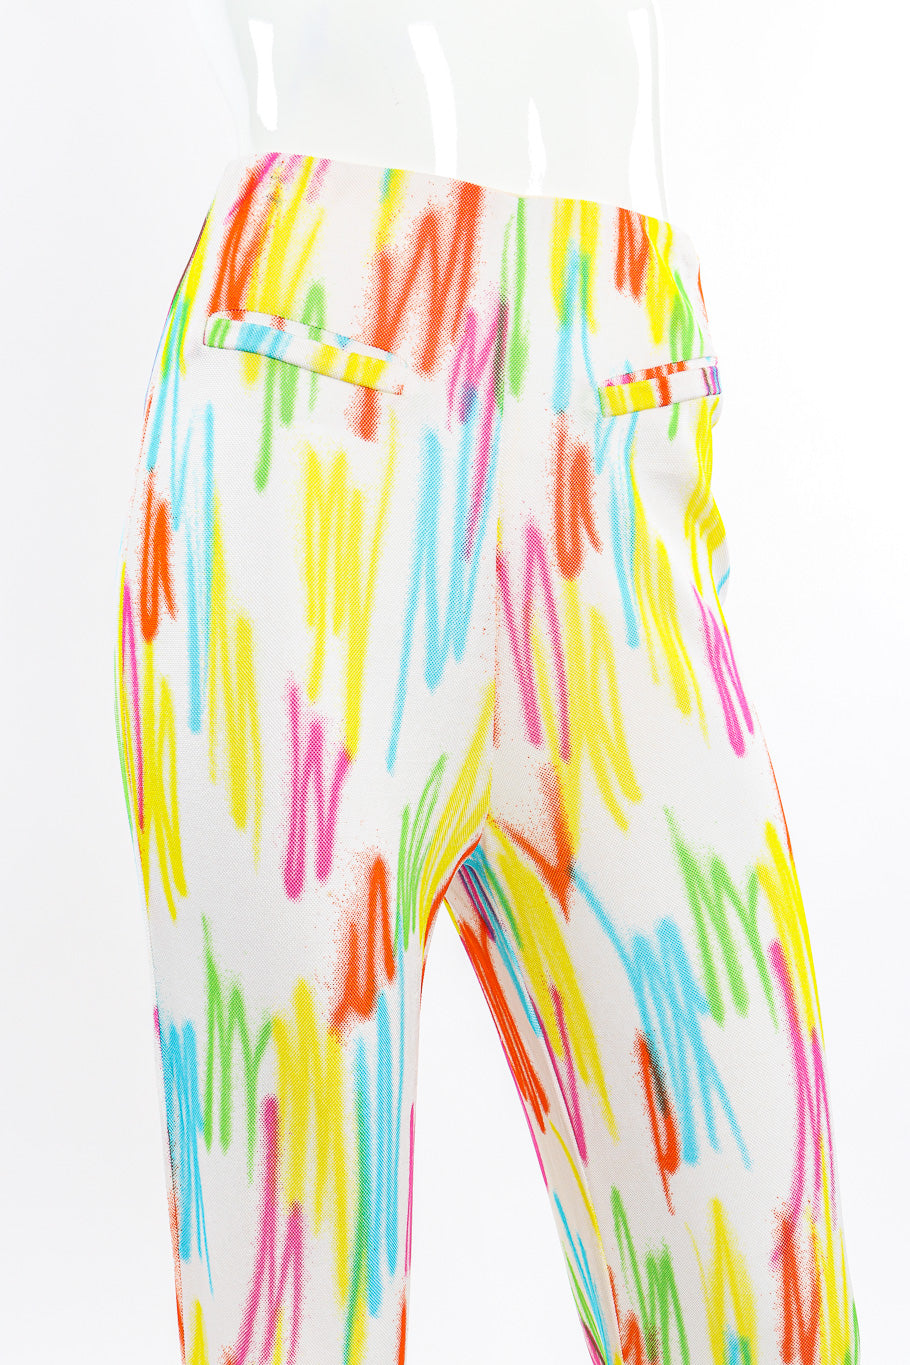 Vintage Gianni Versace 1996 SS Neon Scribble Top and Pant Set front view of pant waist on mannequin closeup @Recessla